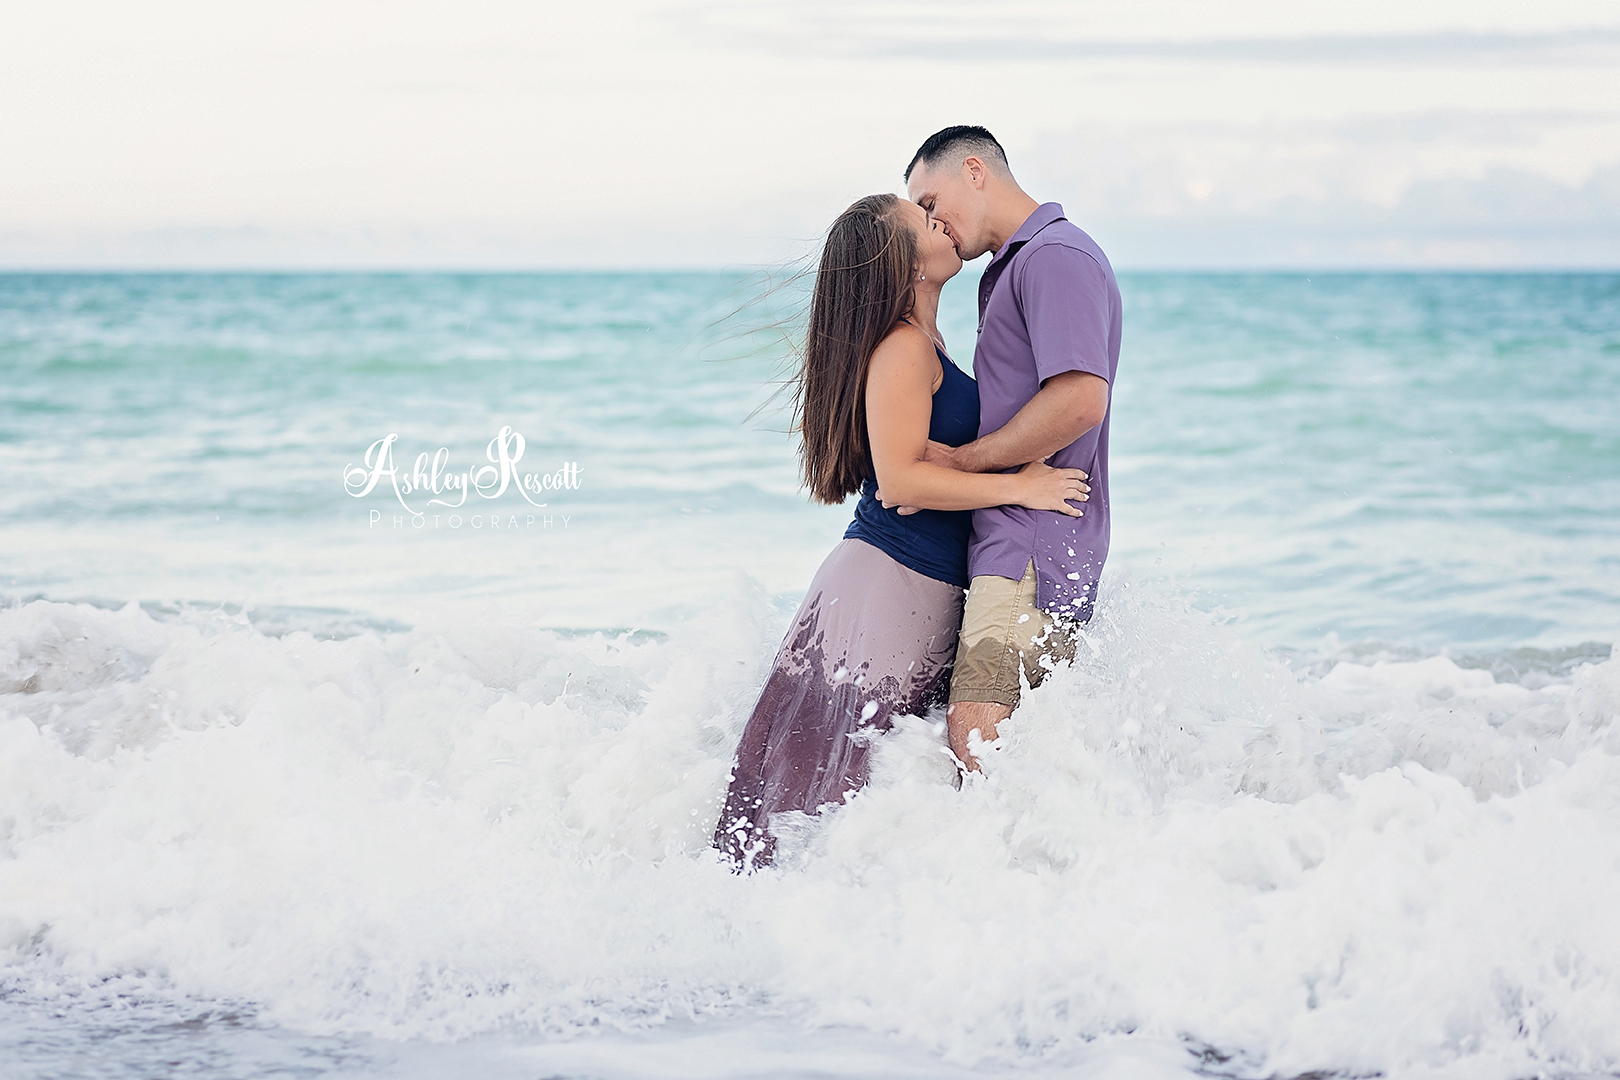 couple kissing while standing in waves at beach at sunset